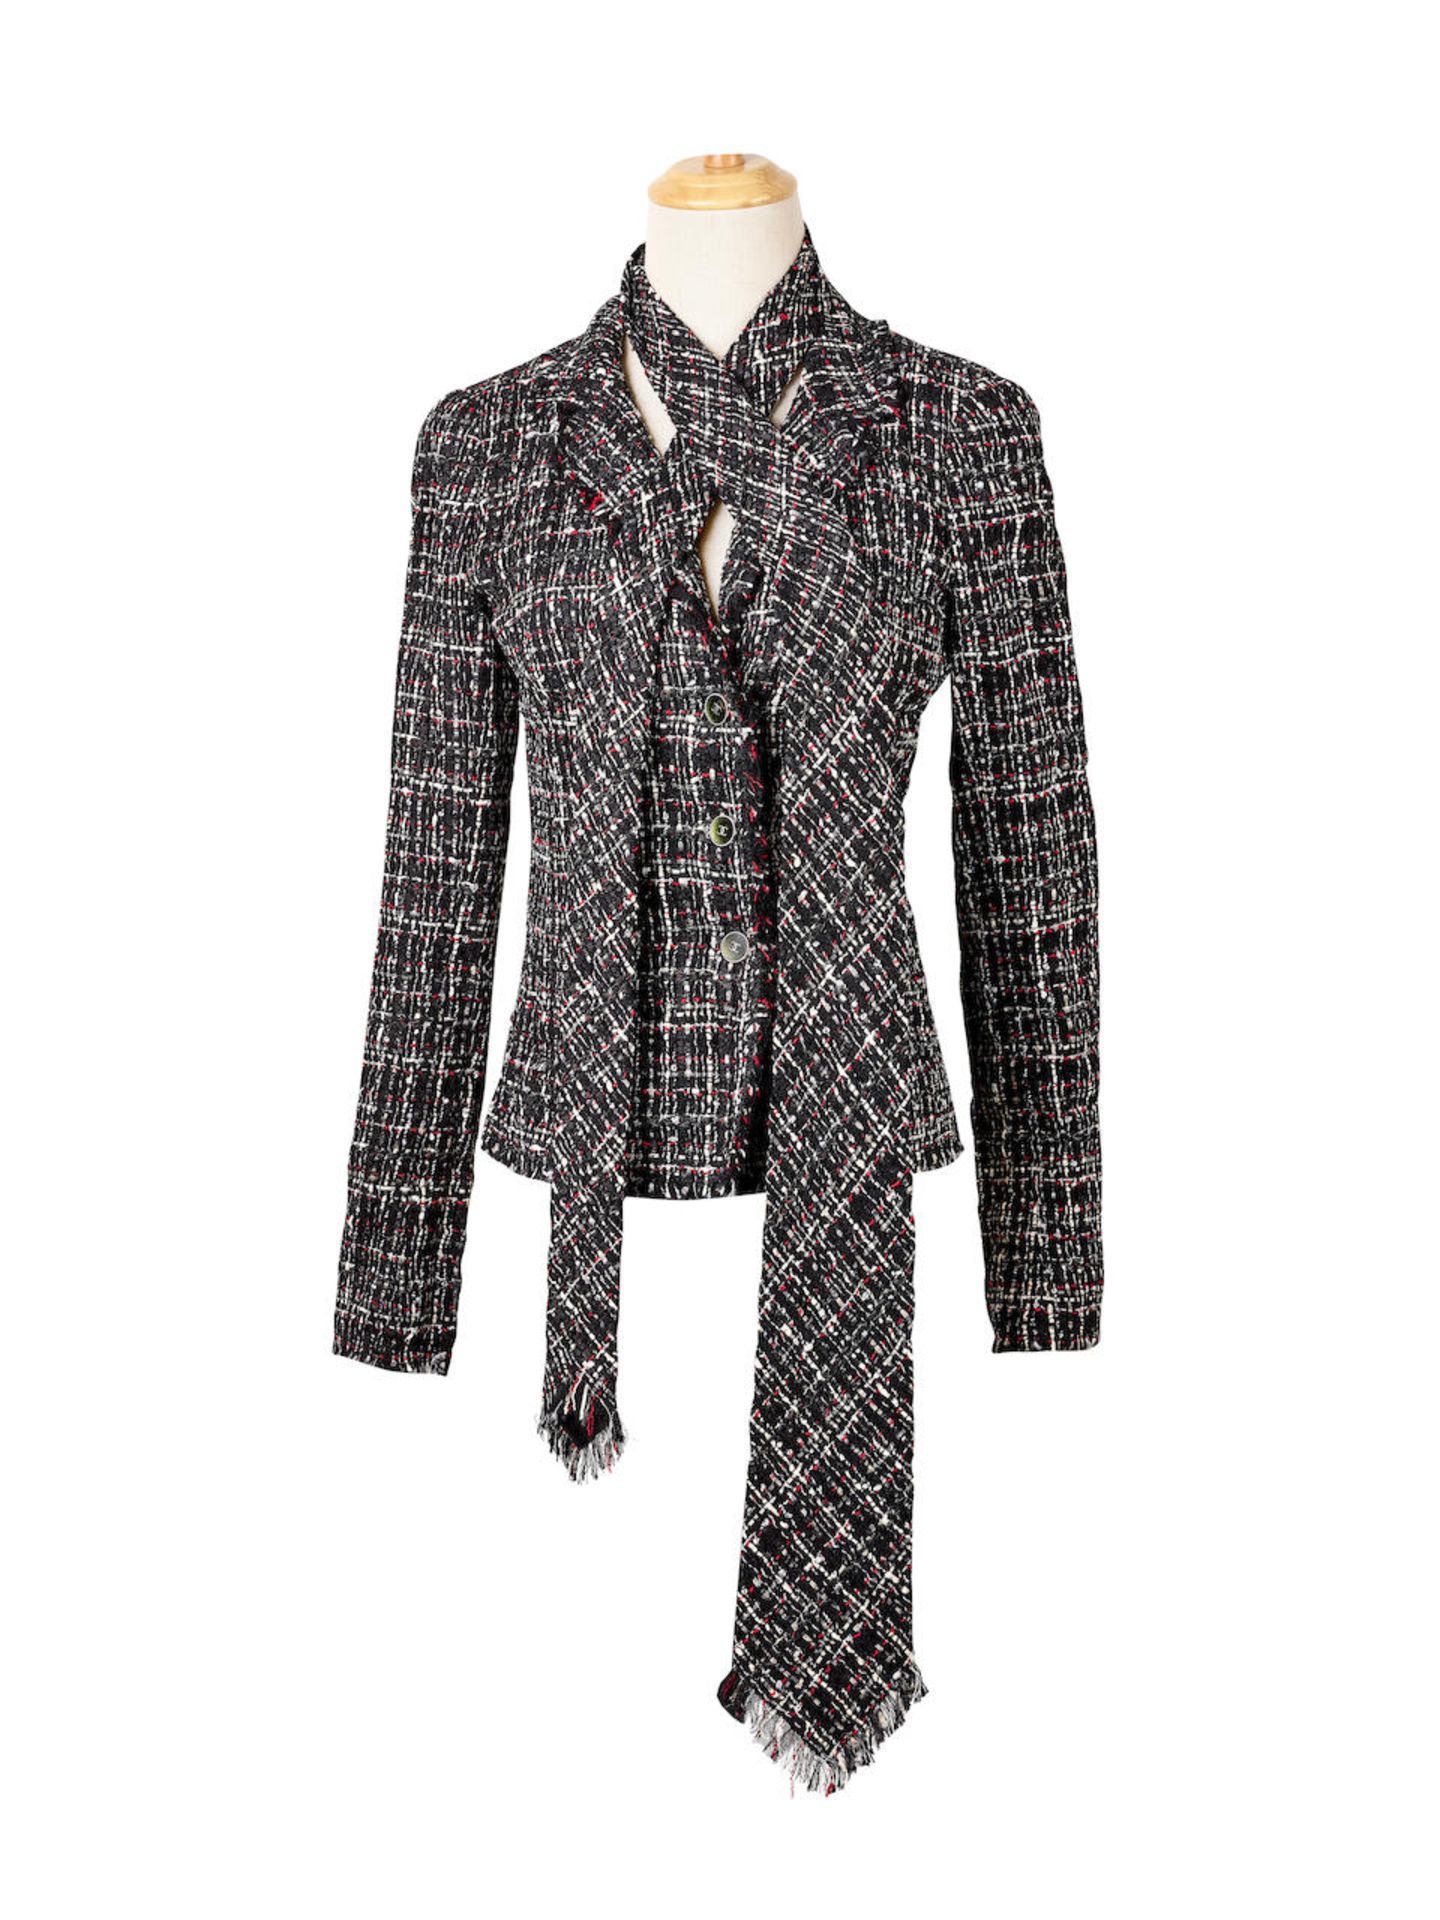 CHANEL: BLACK x WHITE x RED LIGHT WEIGHT TWEED VESTE APPUYEE JACKET WITH CC LOGO BUTTONS AND TIE...